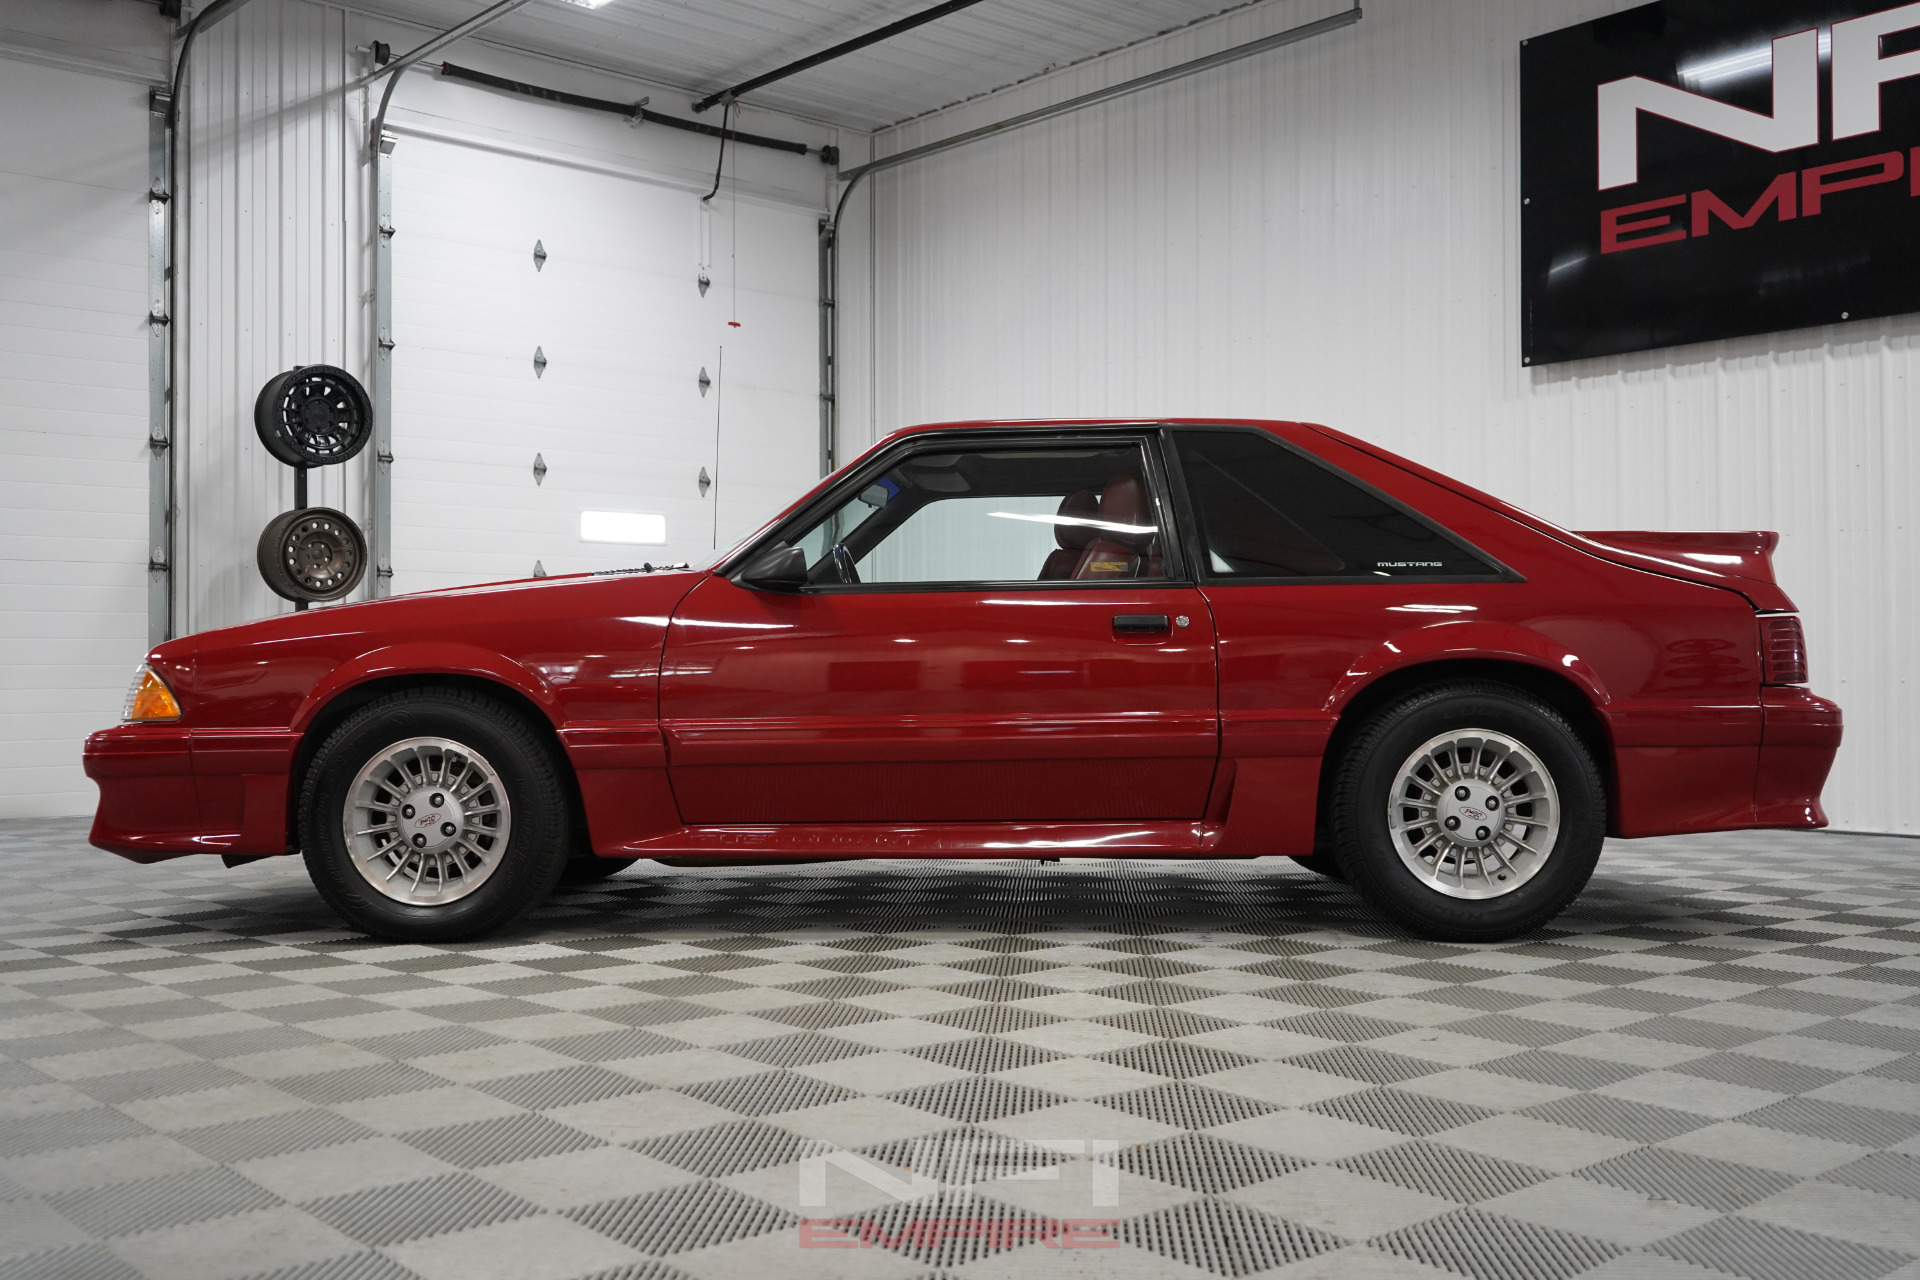 Used 1987 Ford Mustang GT 5.0 GT For Sale (Sold)